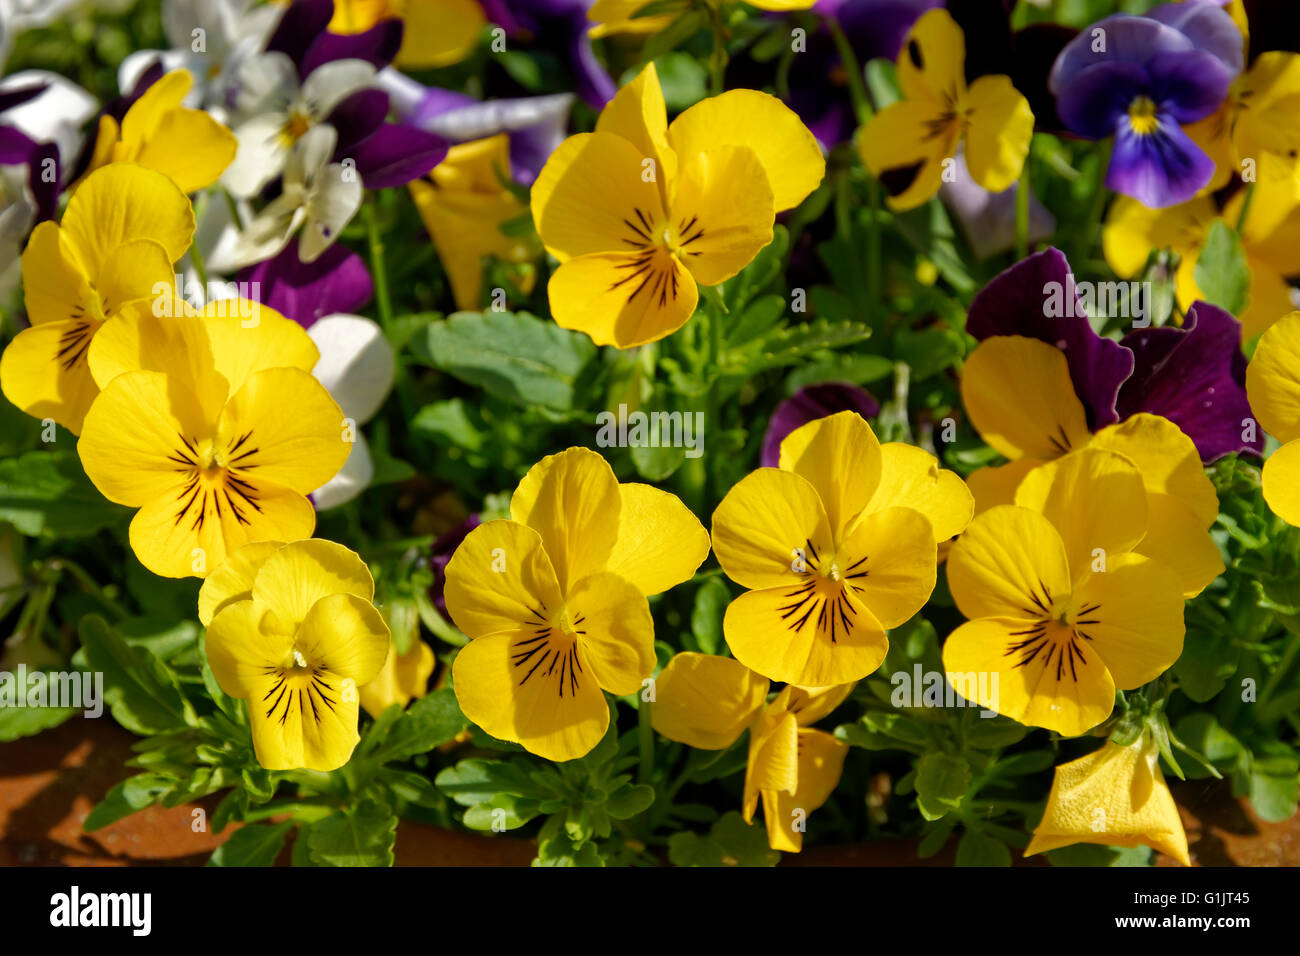 Yellow and Violet Pansies Stock Photo